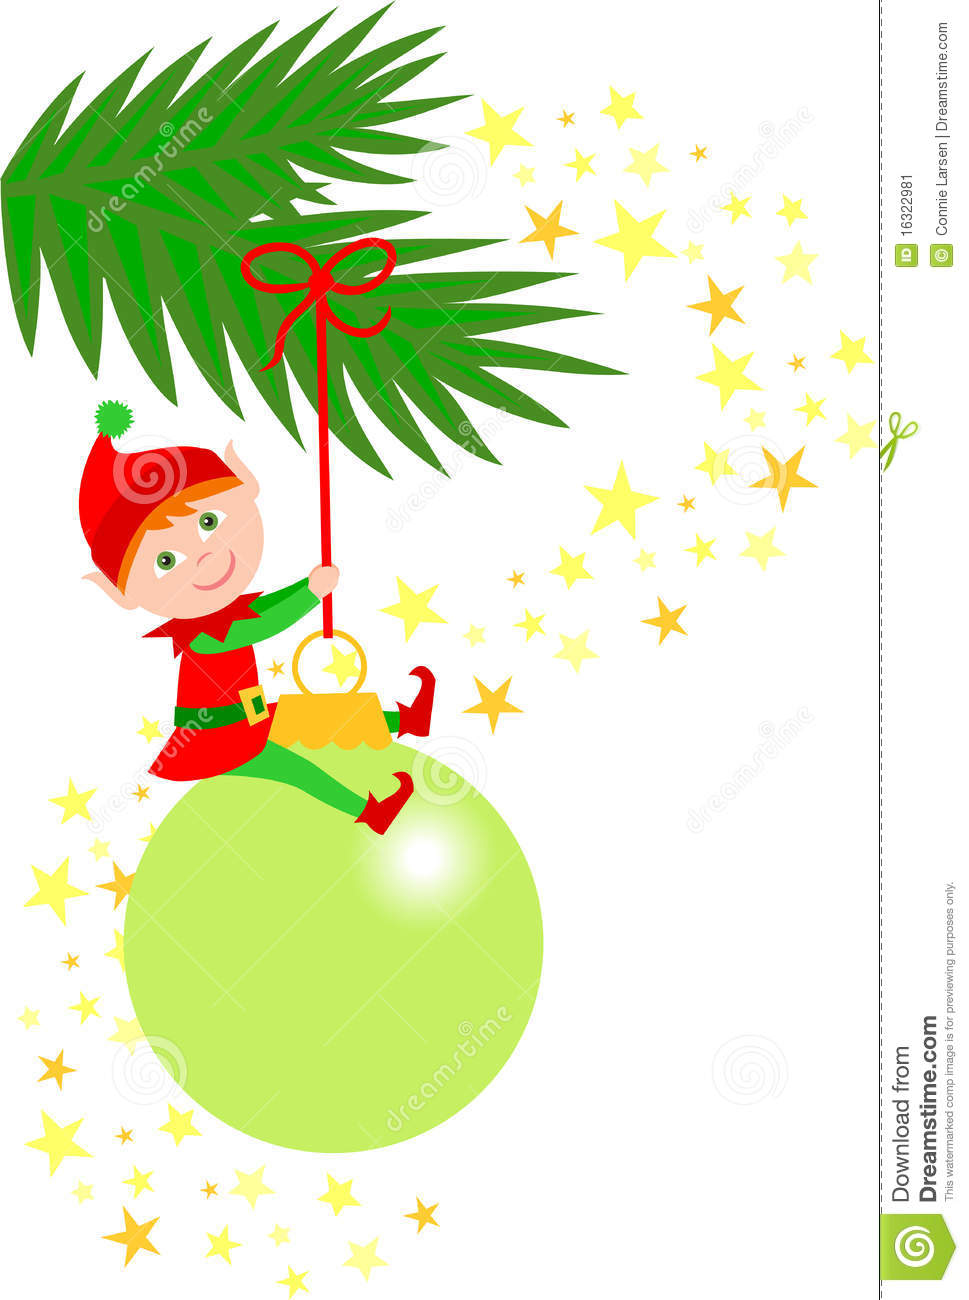 Illustration Of A Cute Christmas Elf Sitting On A Hanging Ornament